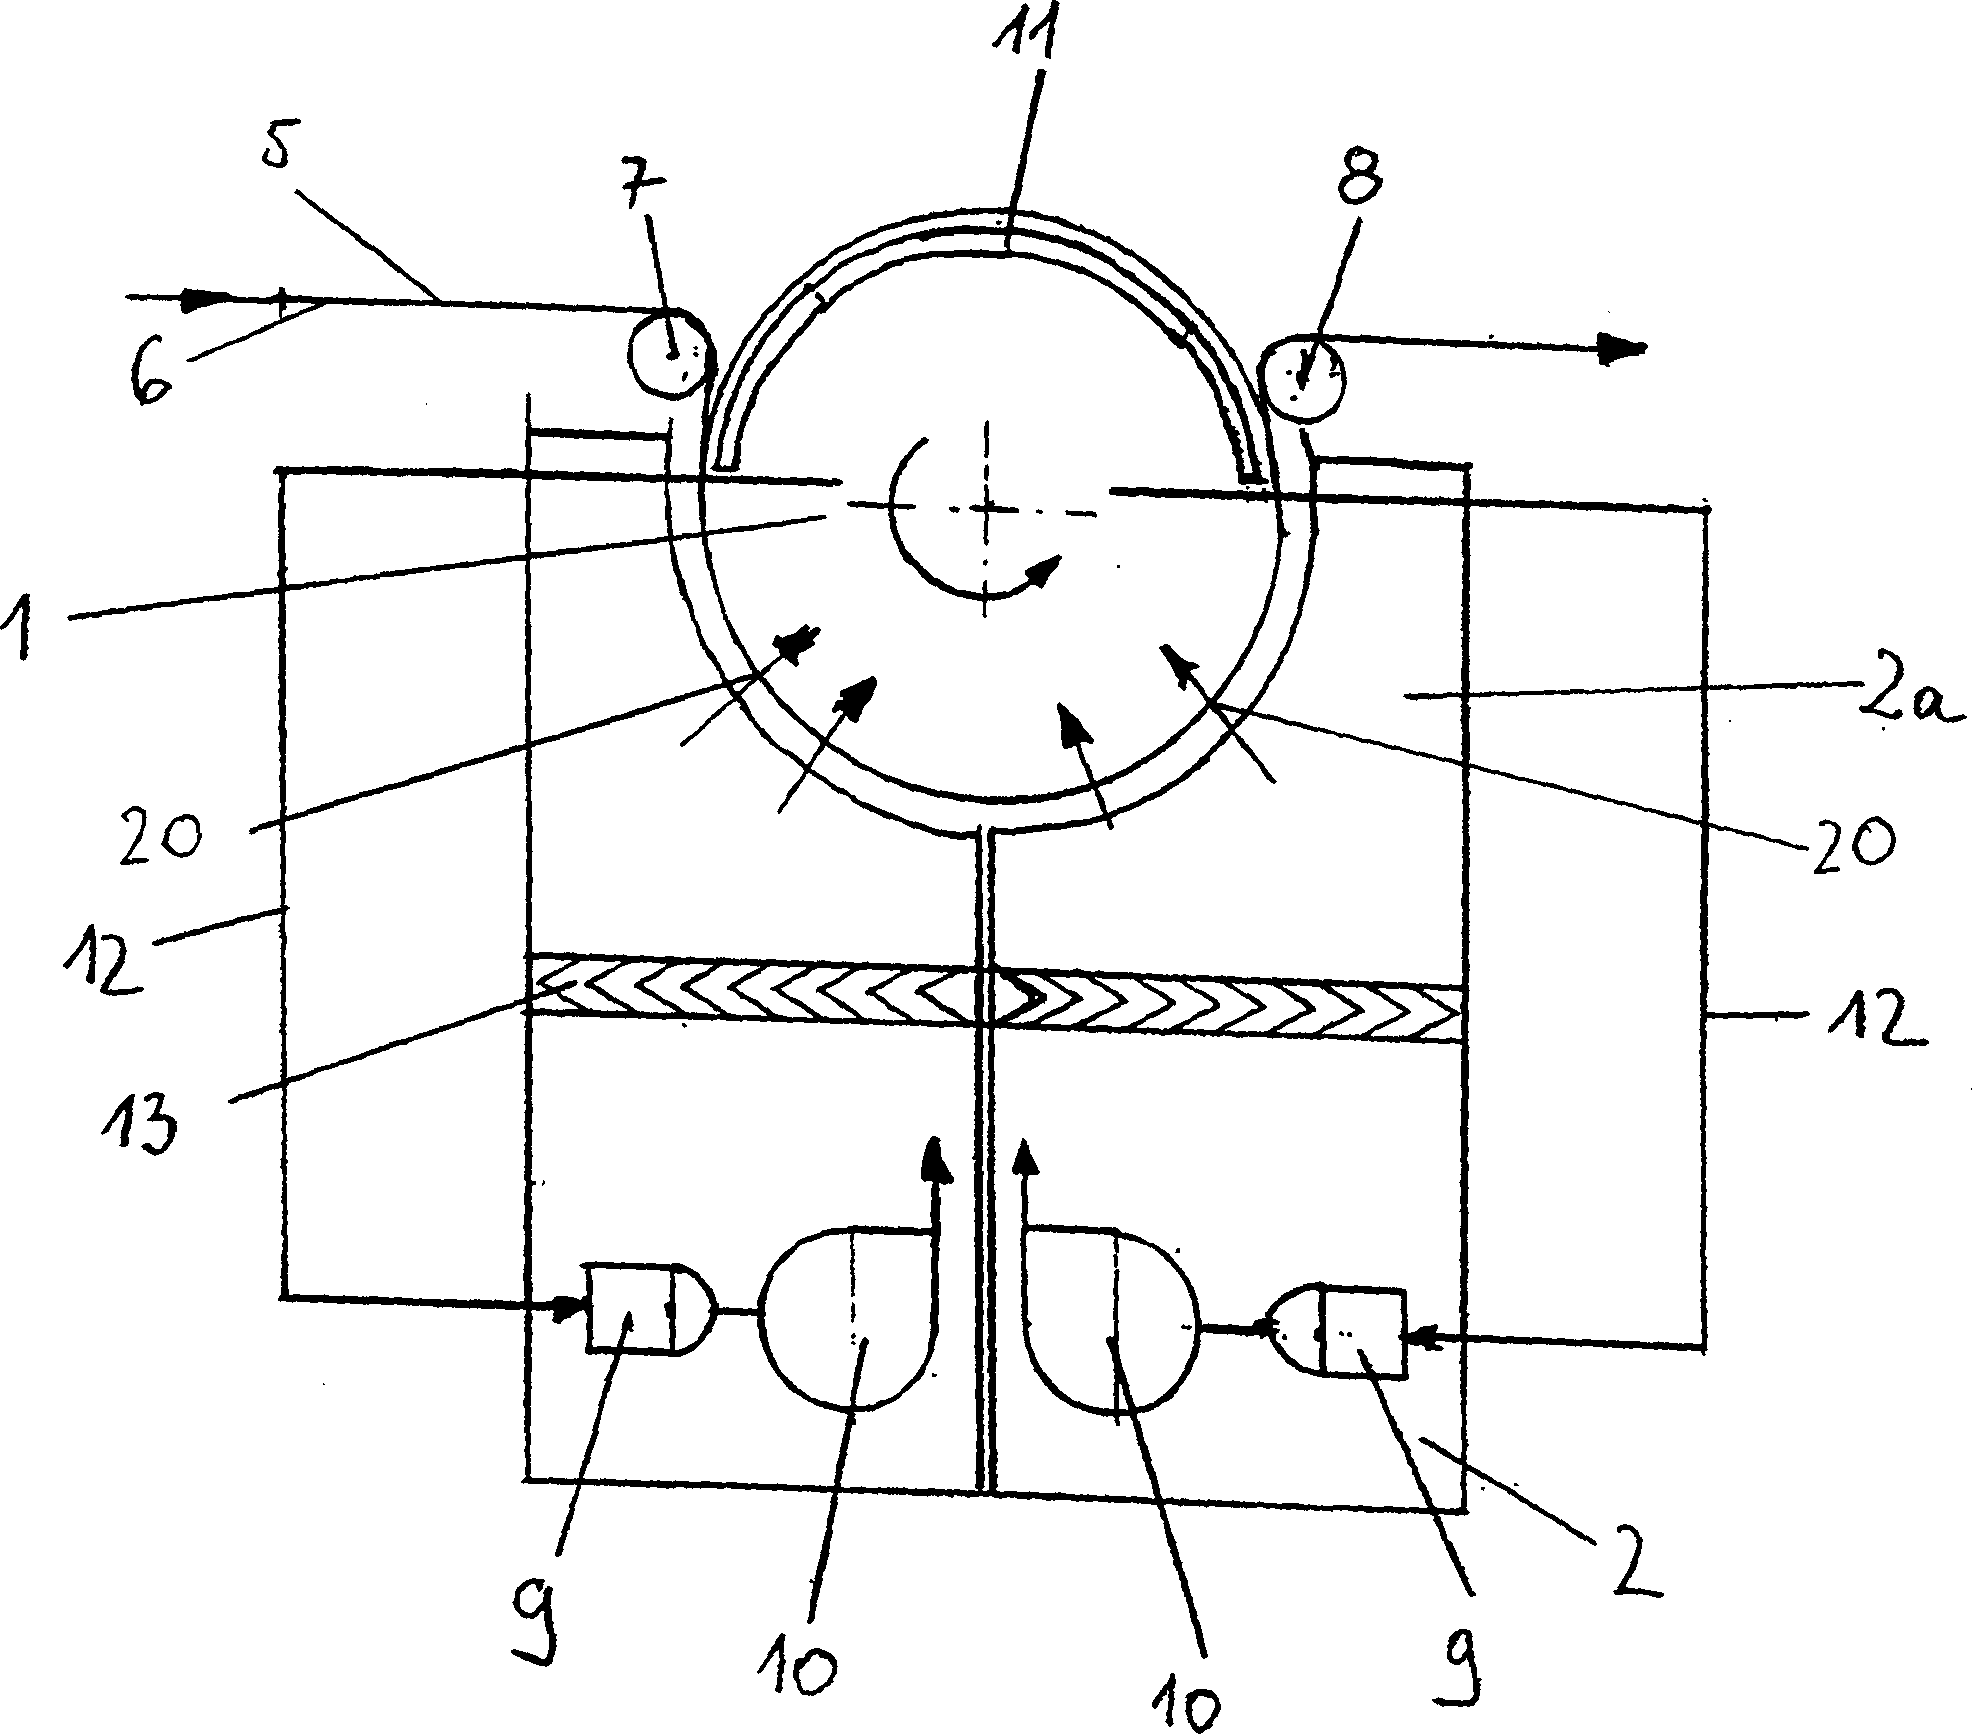 Apparatus for drying a paper web